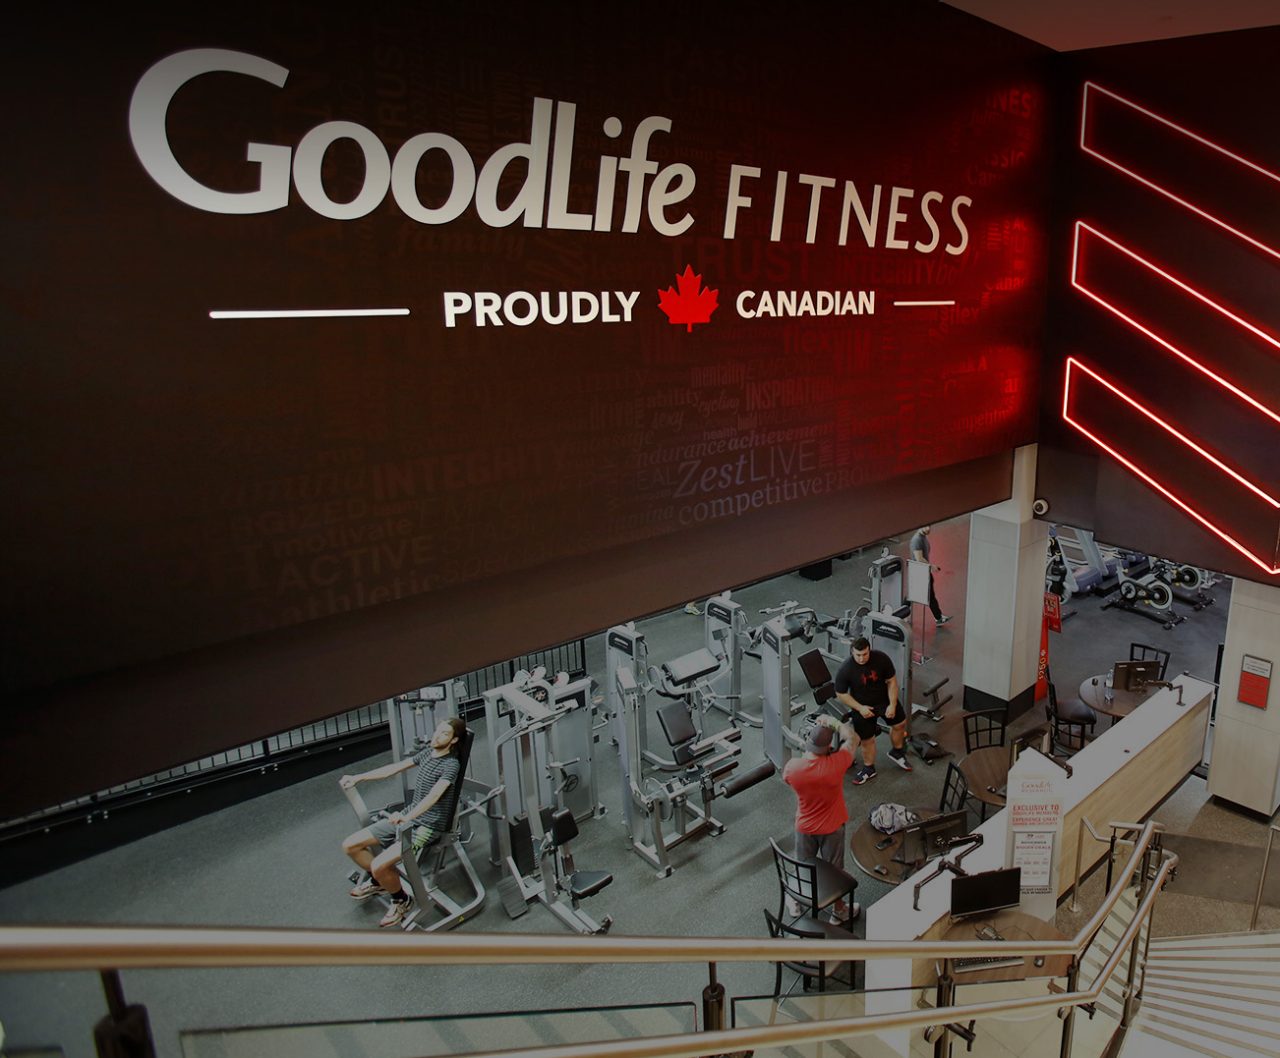 Aerial shot of a GoodLife club interior area with machine and three men working out